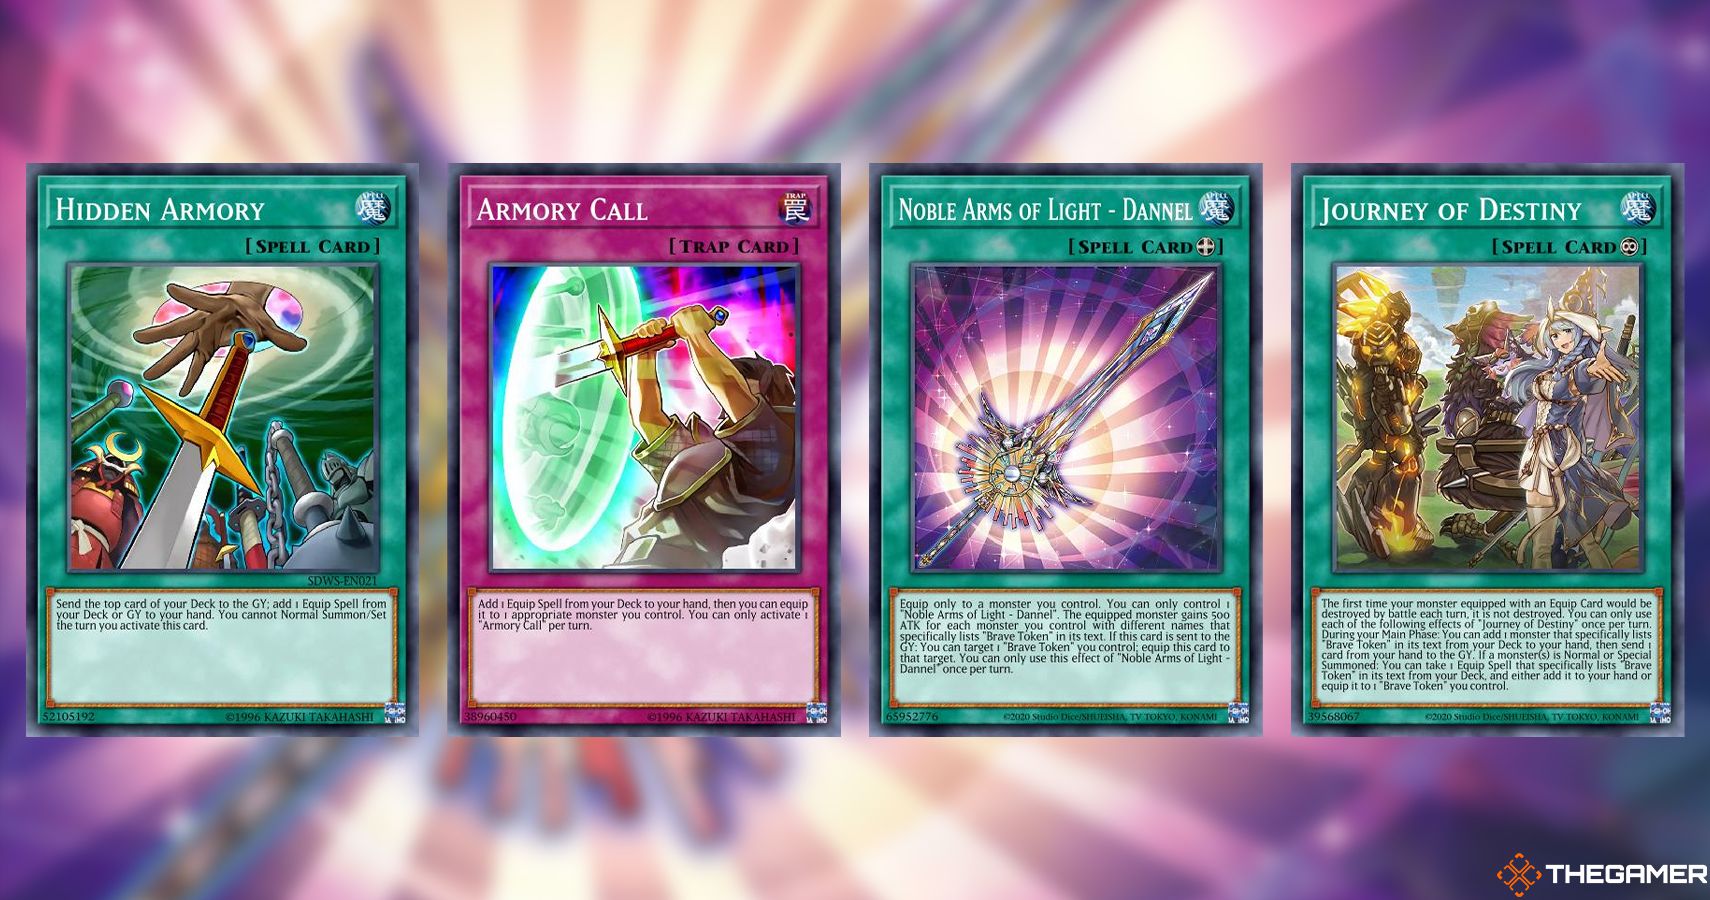 Every Archetype In YuGiOh!s The Grand Creators Set